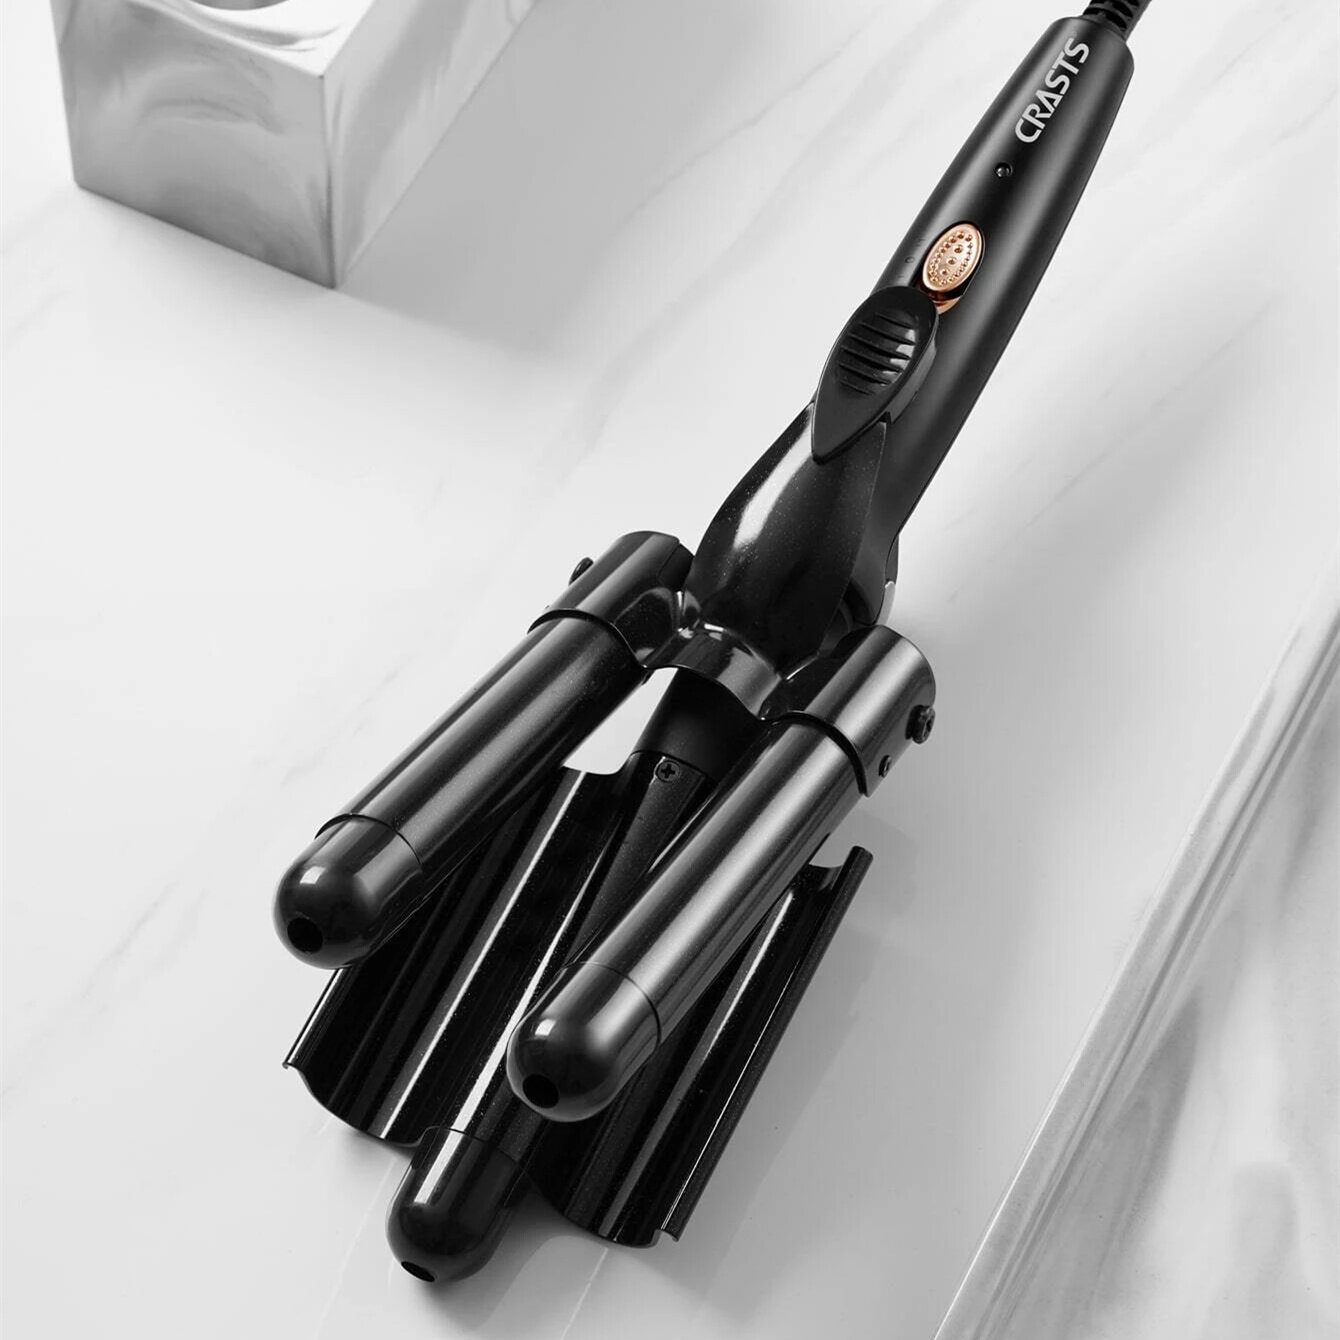 CRASTS Star-Making 22mm Three-Bar Foldable And Portable Big Wave Hair Curler